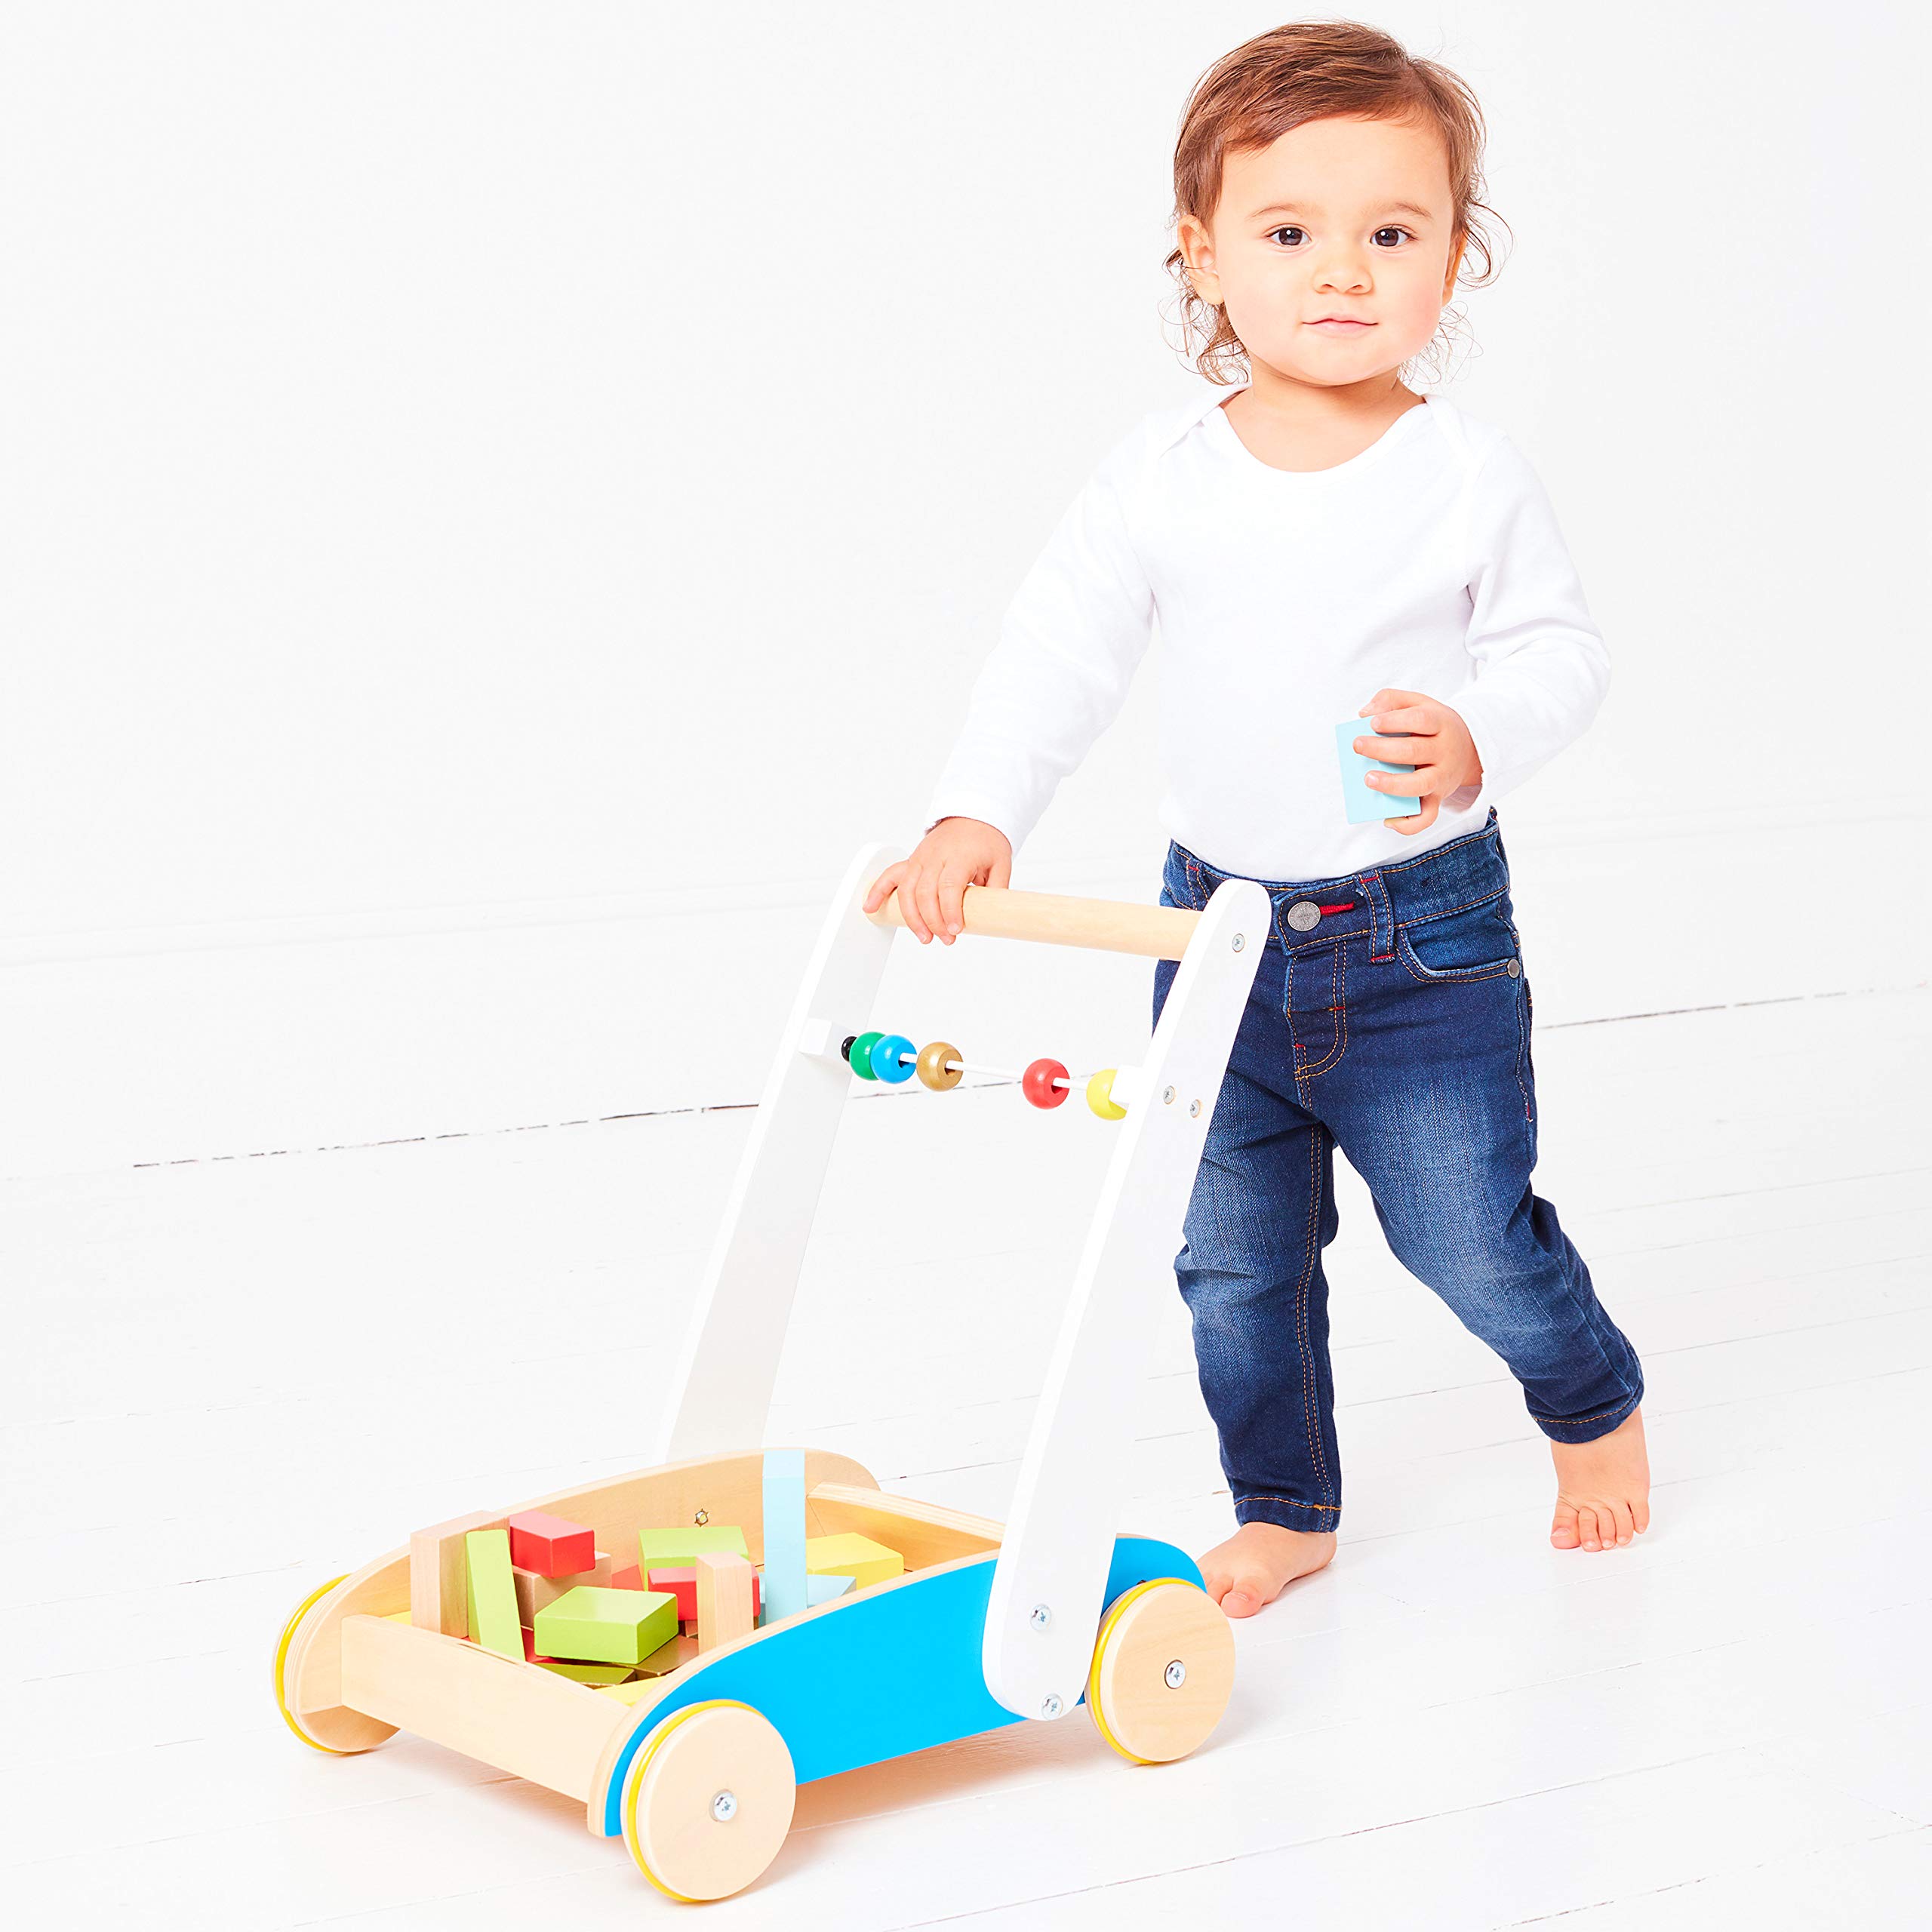 Early Learning Centre Wooden Toddle Truck, Hand Eye Coordination, Physical Development, Instills Confidence, Kids Toys for Ages 18 Month, Amazon Exclusive